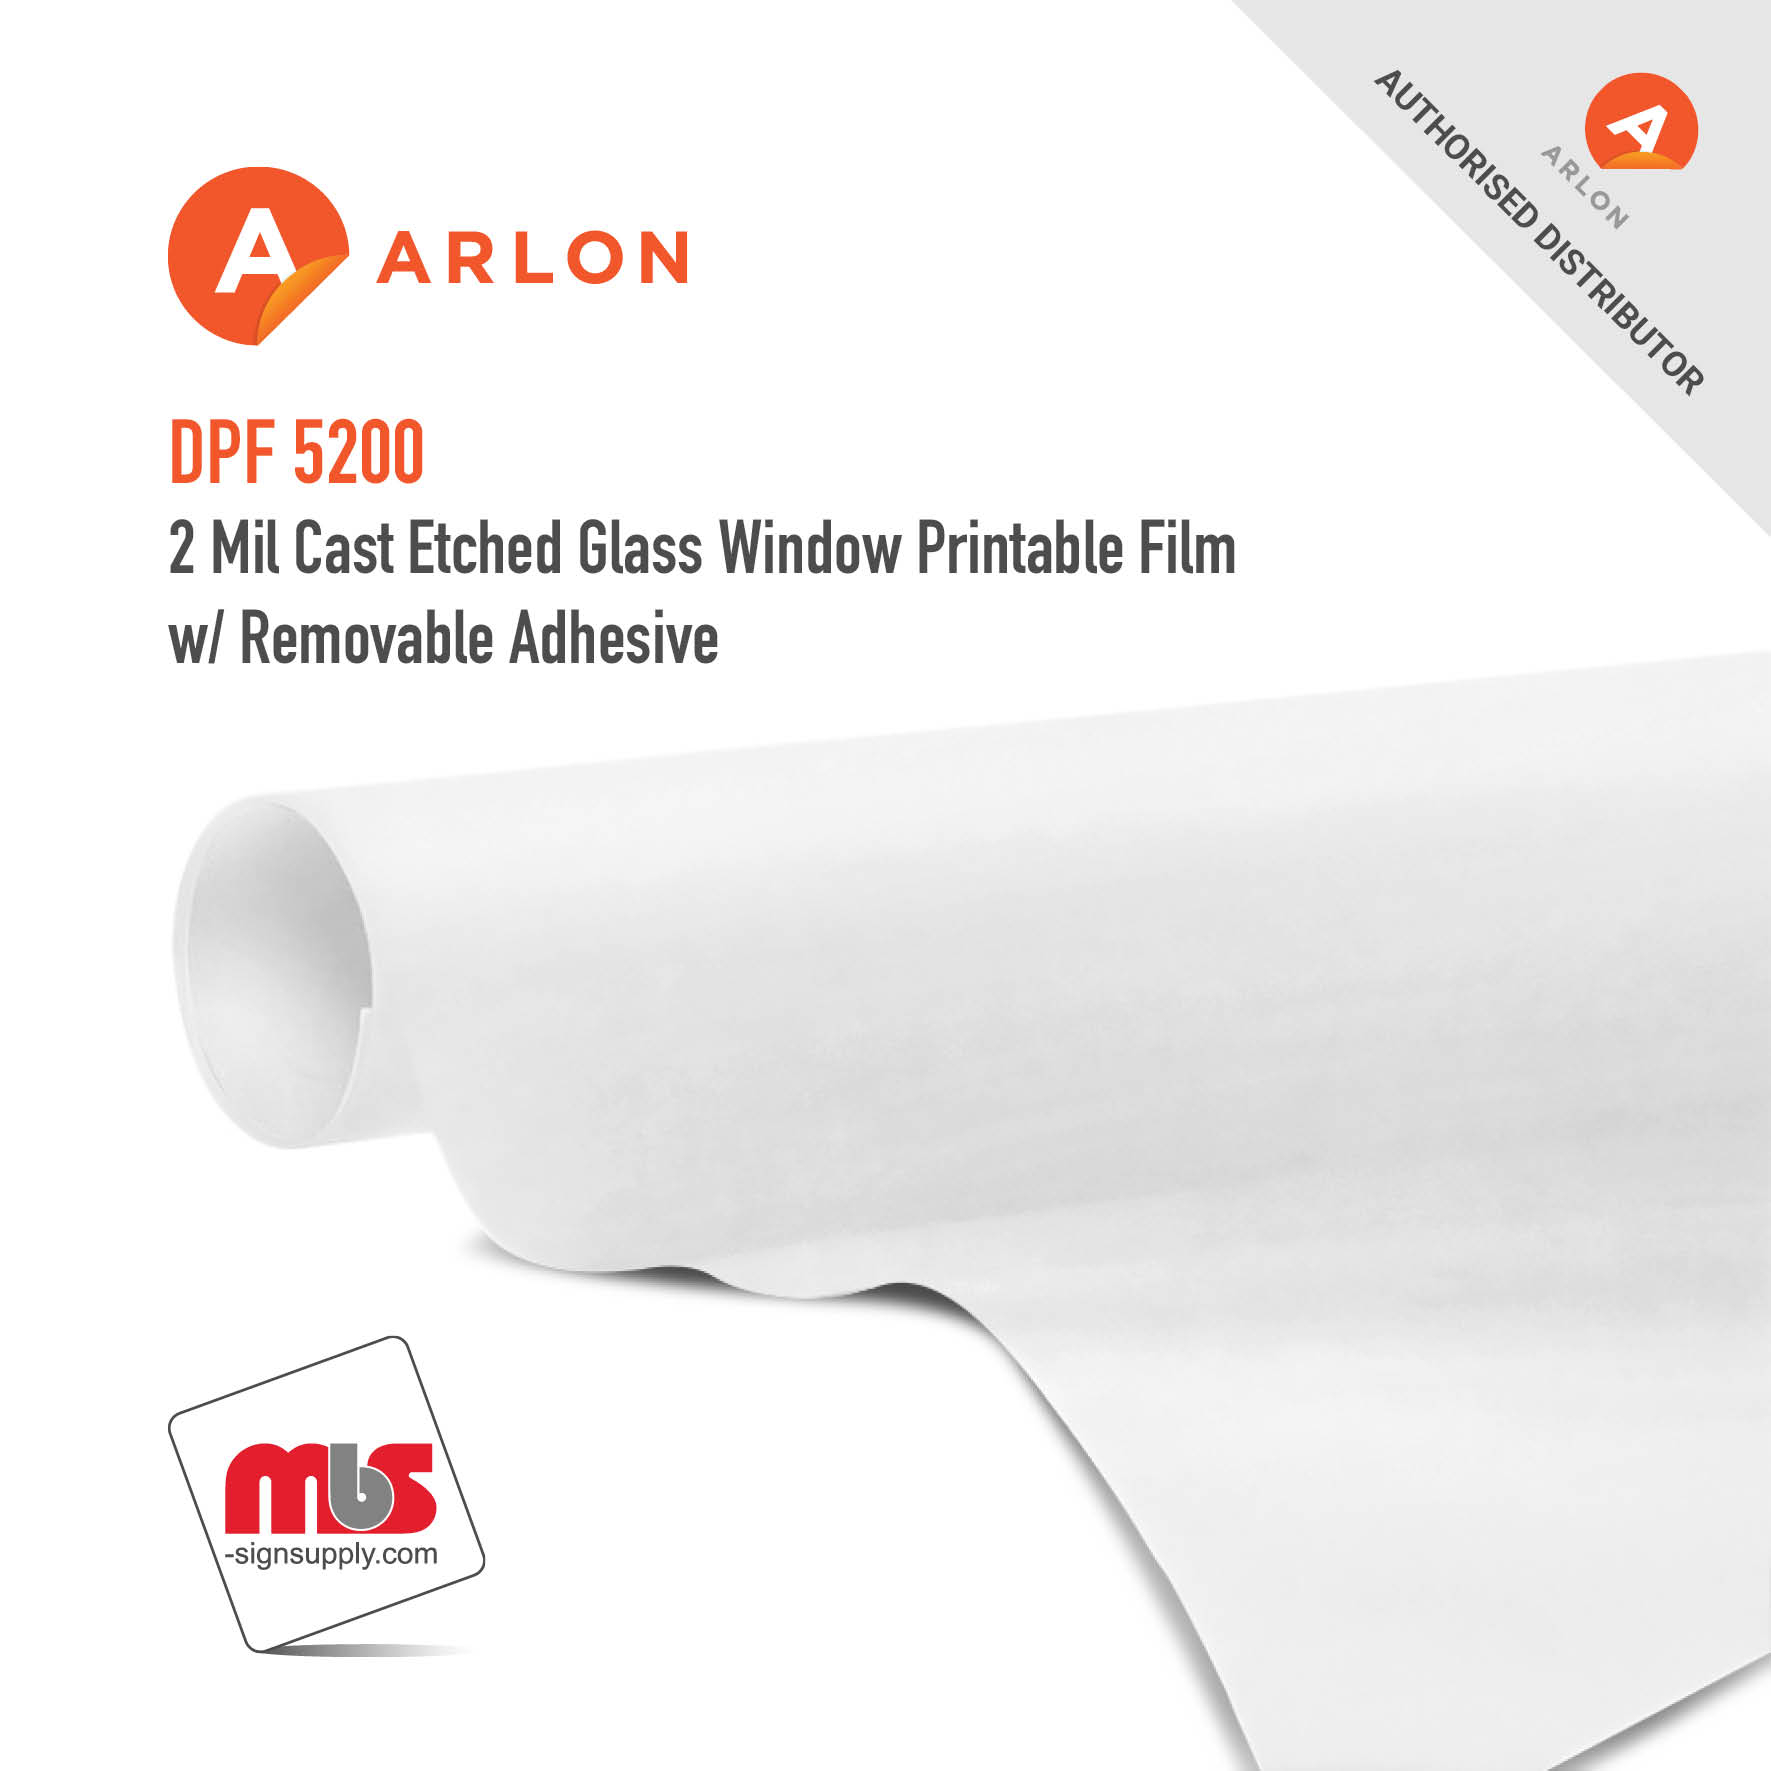 60'' x 50 Yard Roll - Arlon DPF 5200 2 Mil Cast Silver Etched Glass Window Printable Film w/ Removable Adhesive